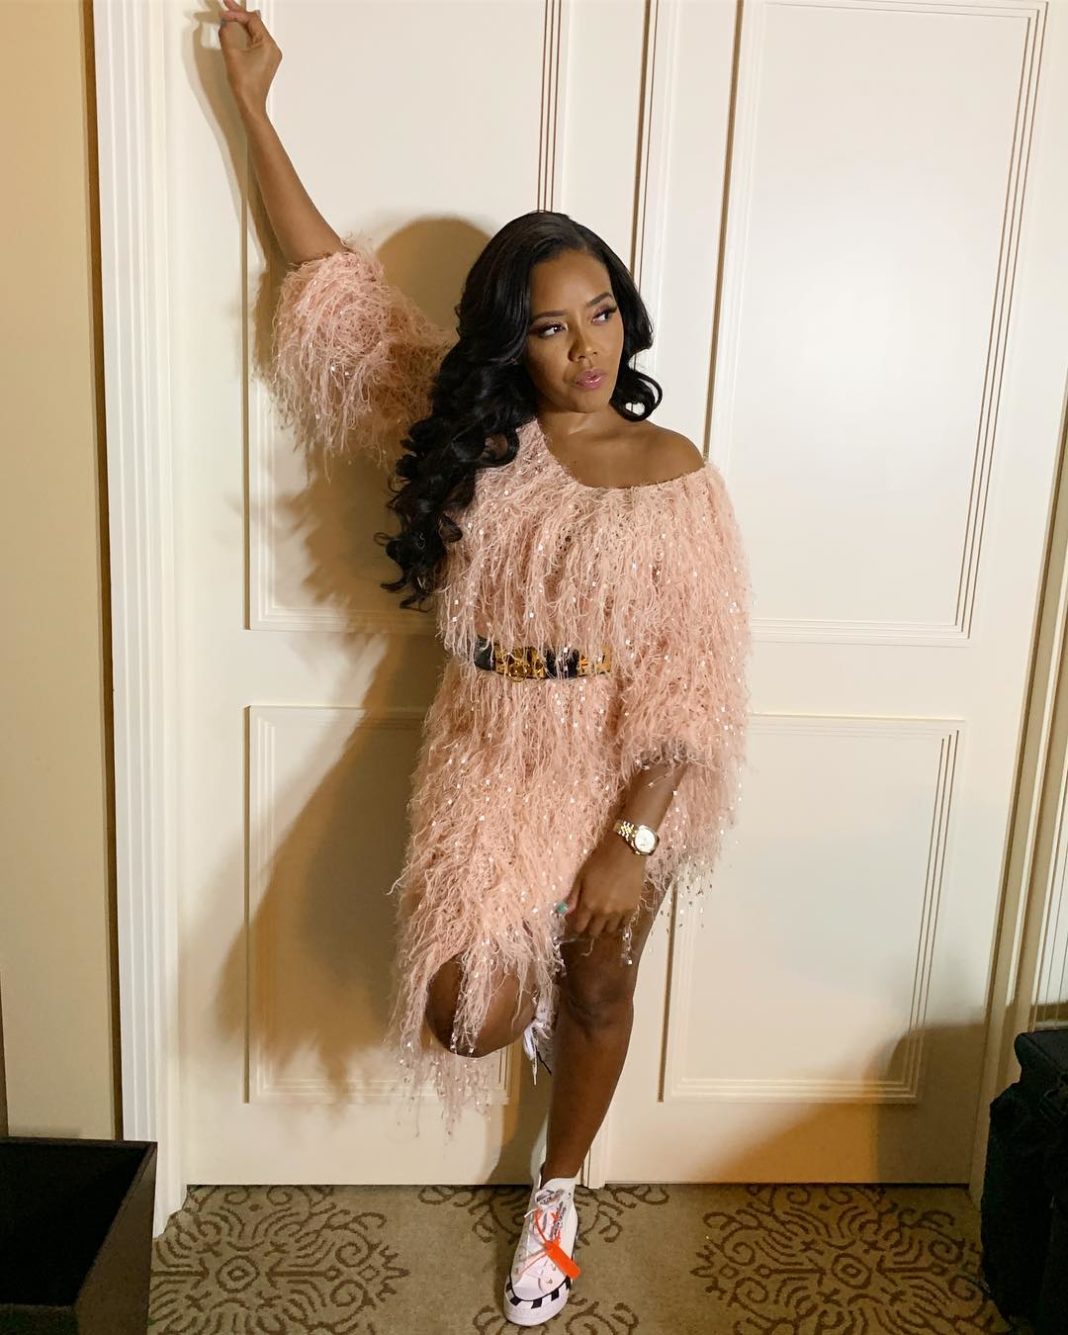 Angela Simmons Shows Off a Casual Fashion Look the Internet Eats Up